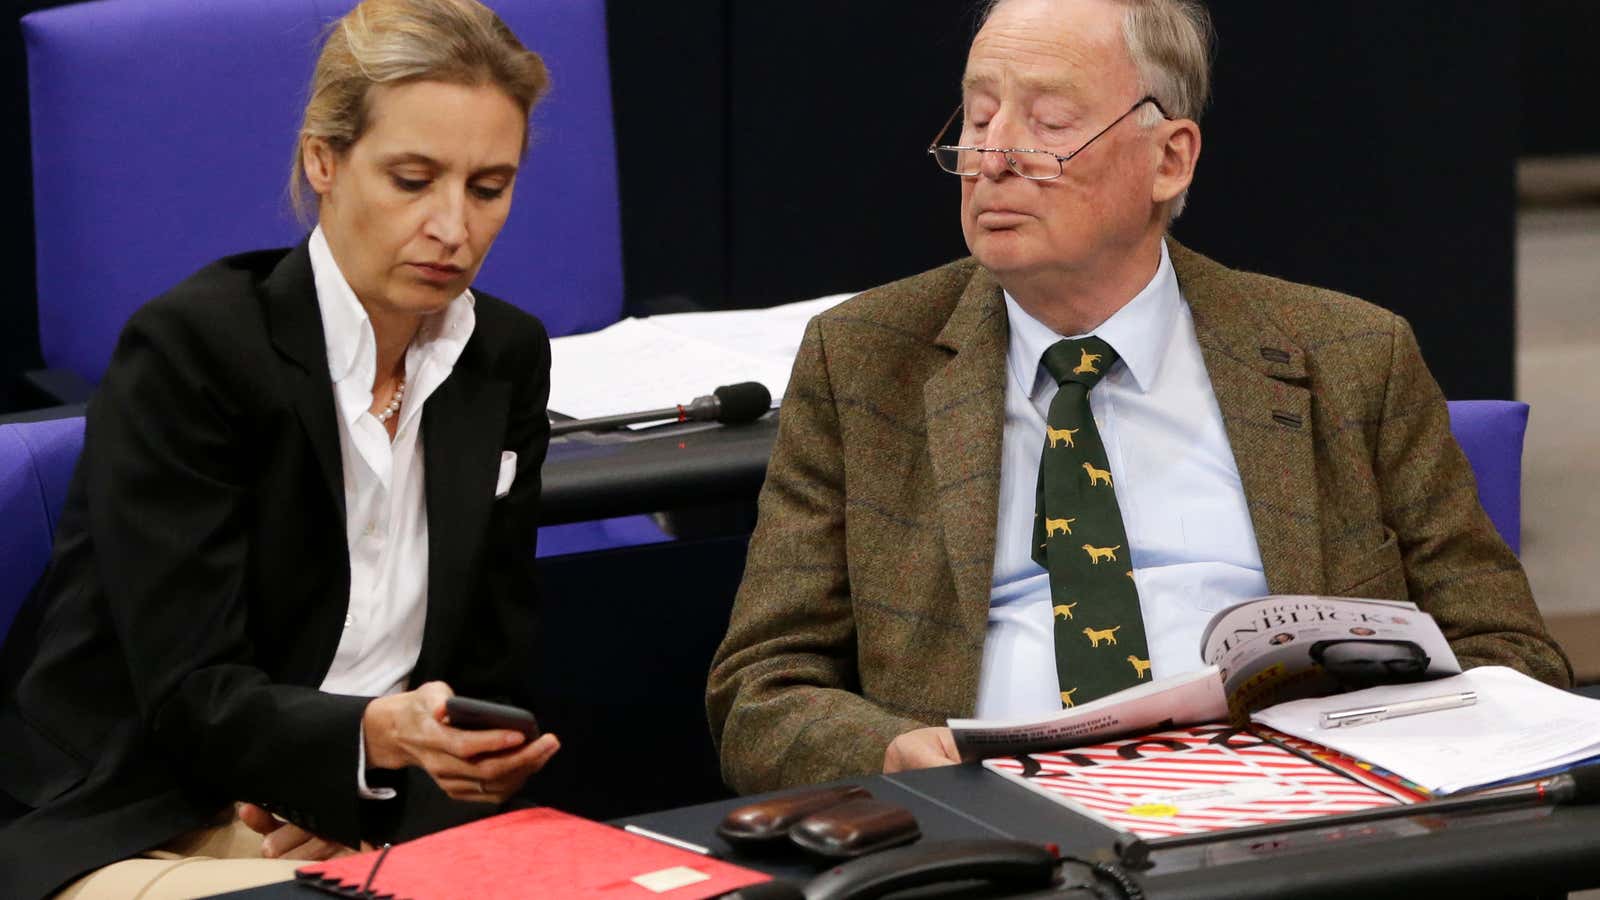 Alice Weidel and Alexander Gauland, parliamentary faction leaders of the Alternative for Germany.